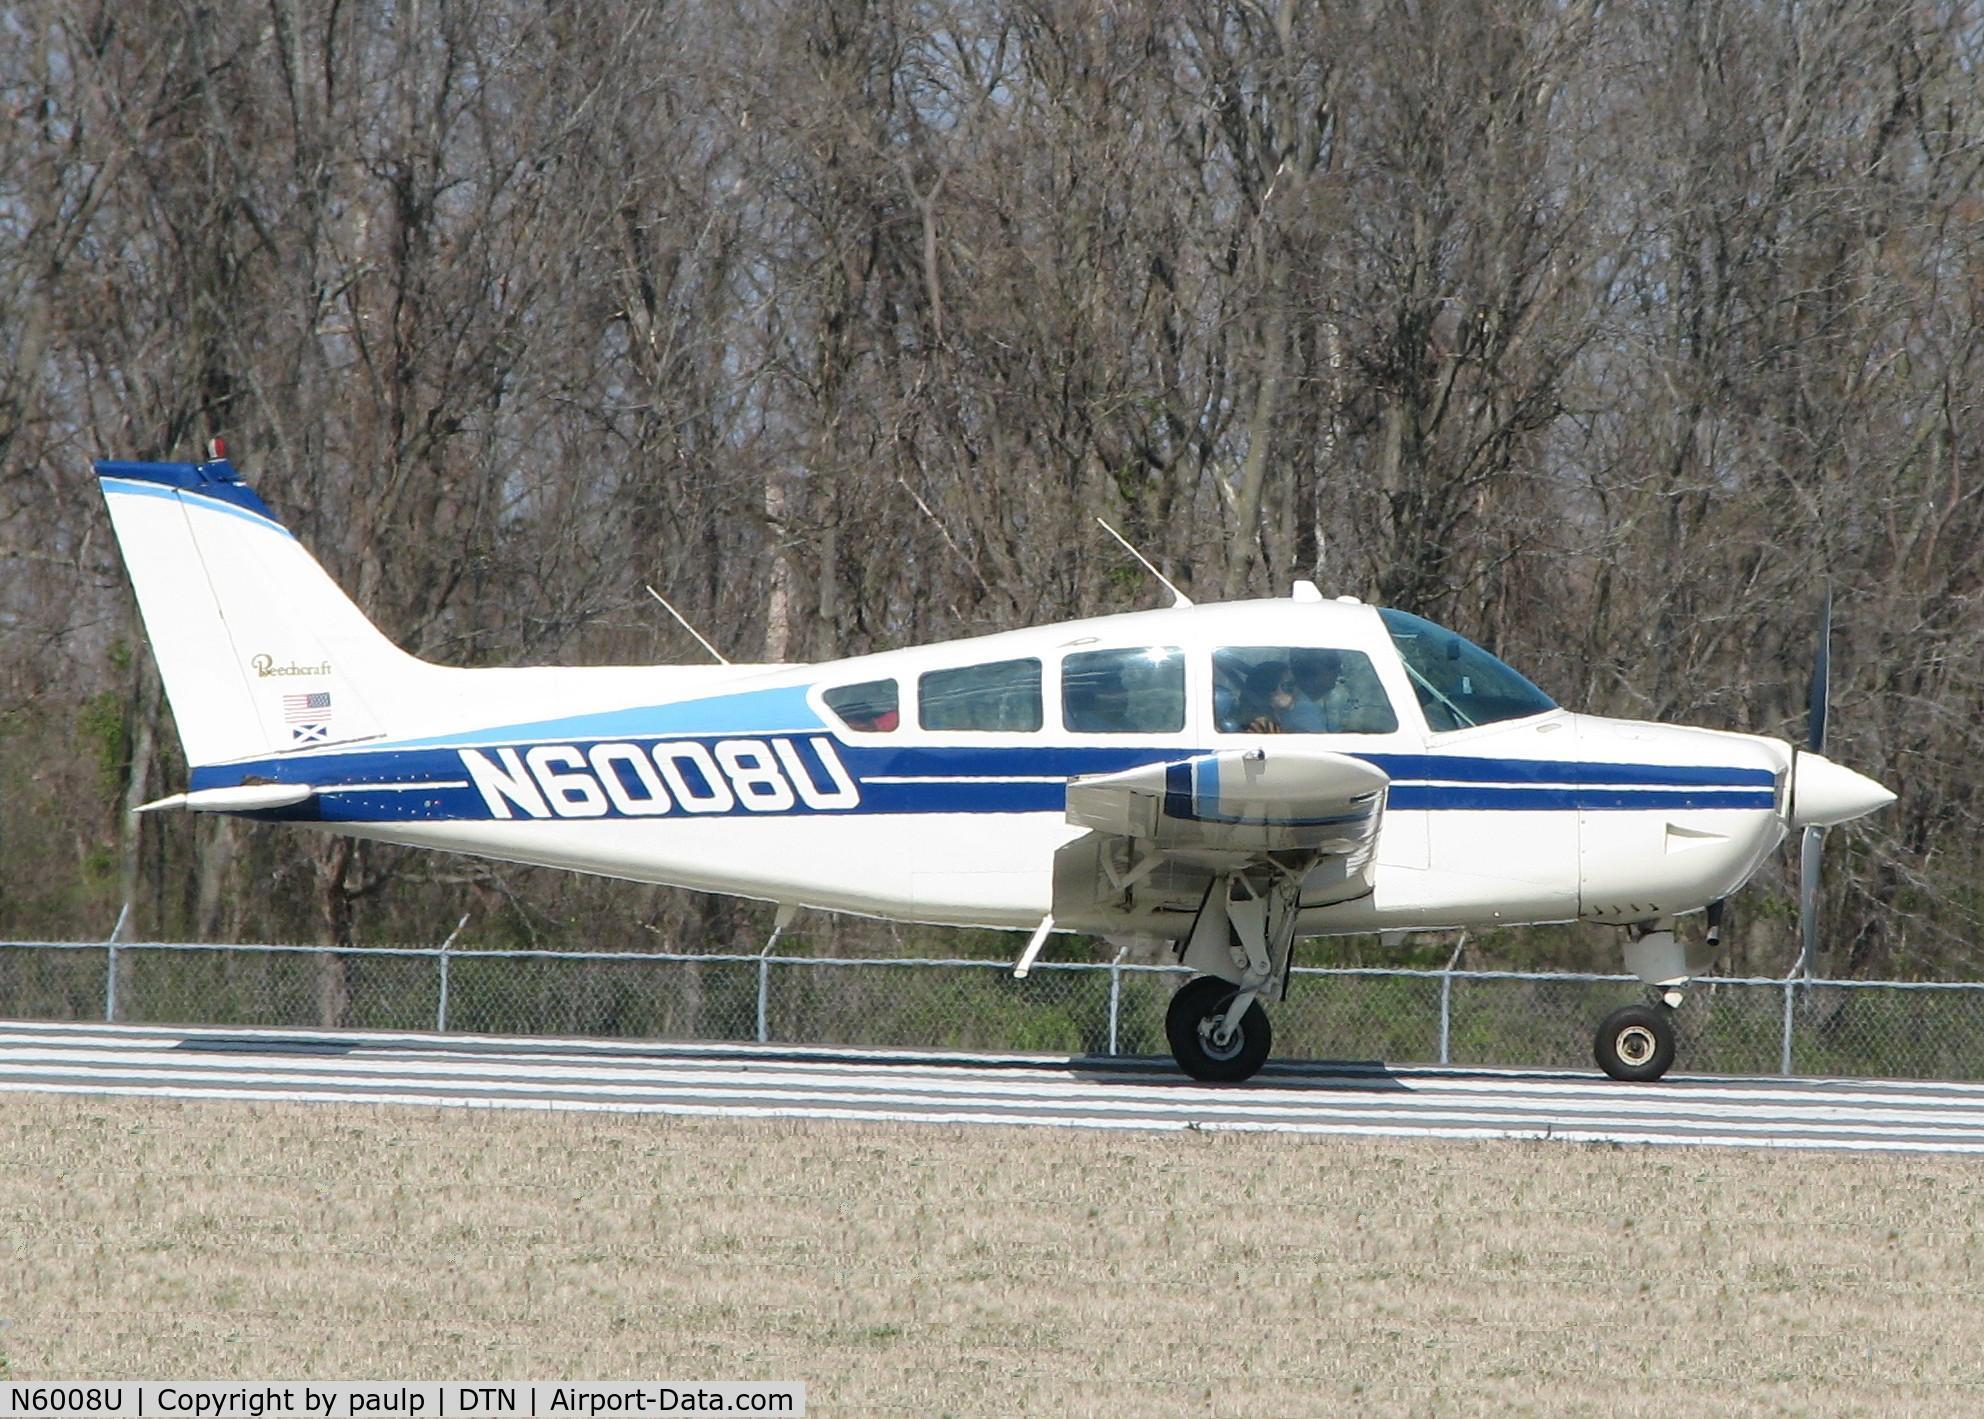 N6008U, 1978 Beech C24R C/N MC-616, Taking off from the Shreveport Downtown airport.